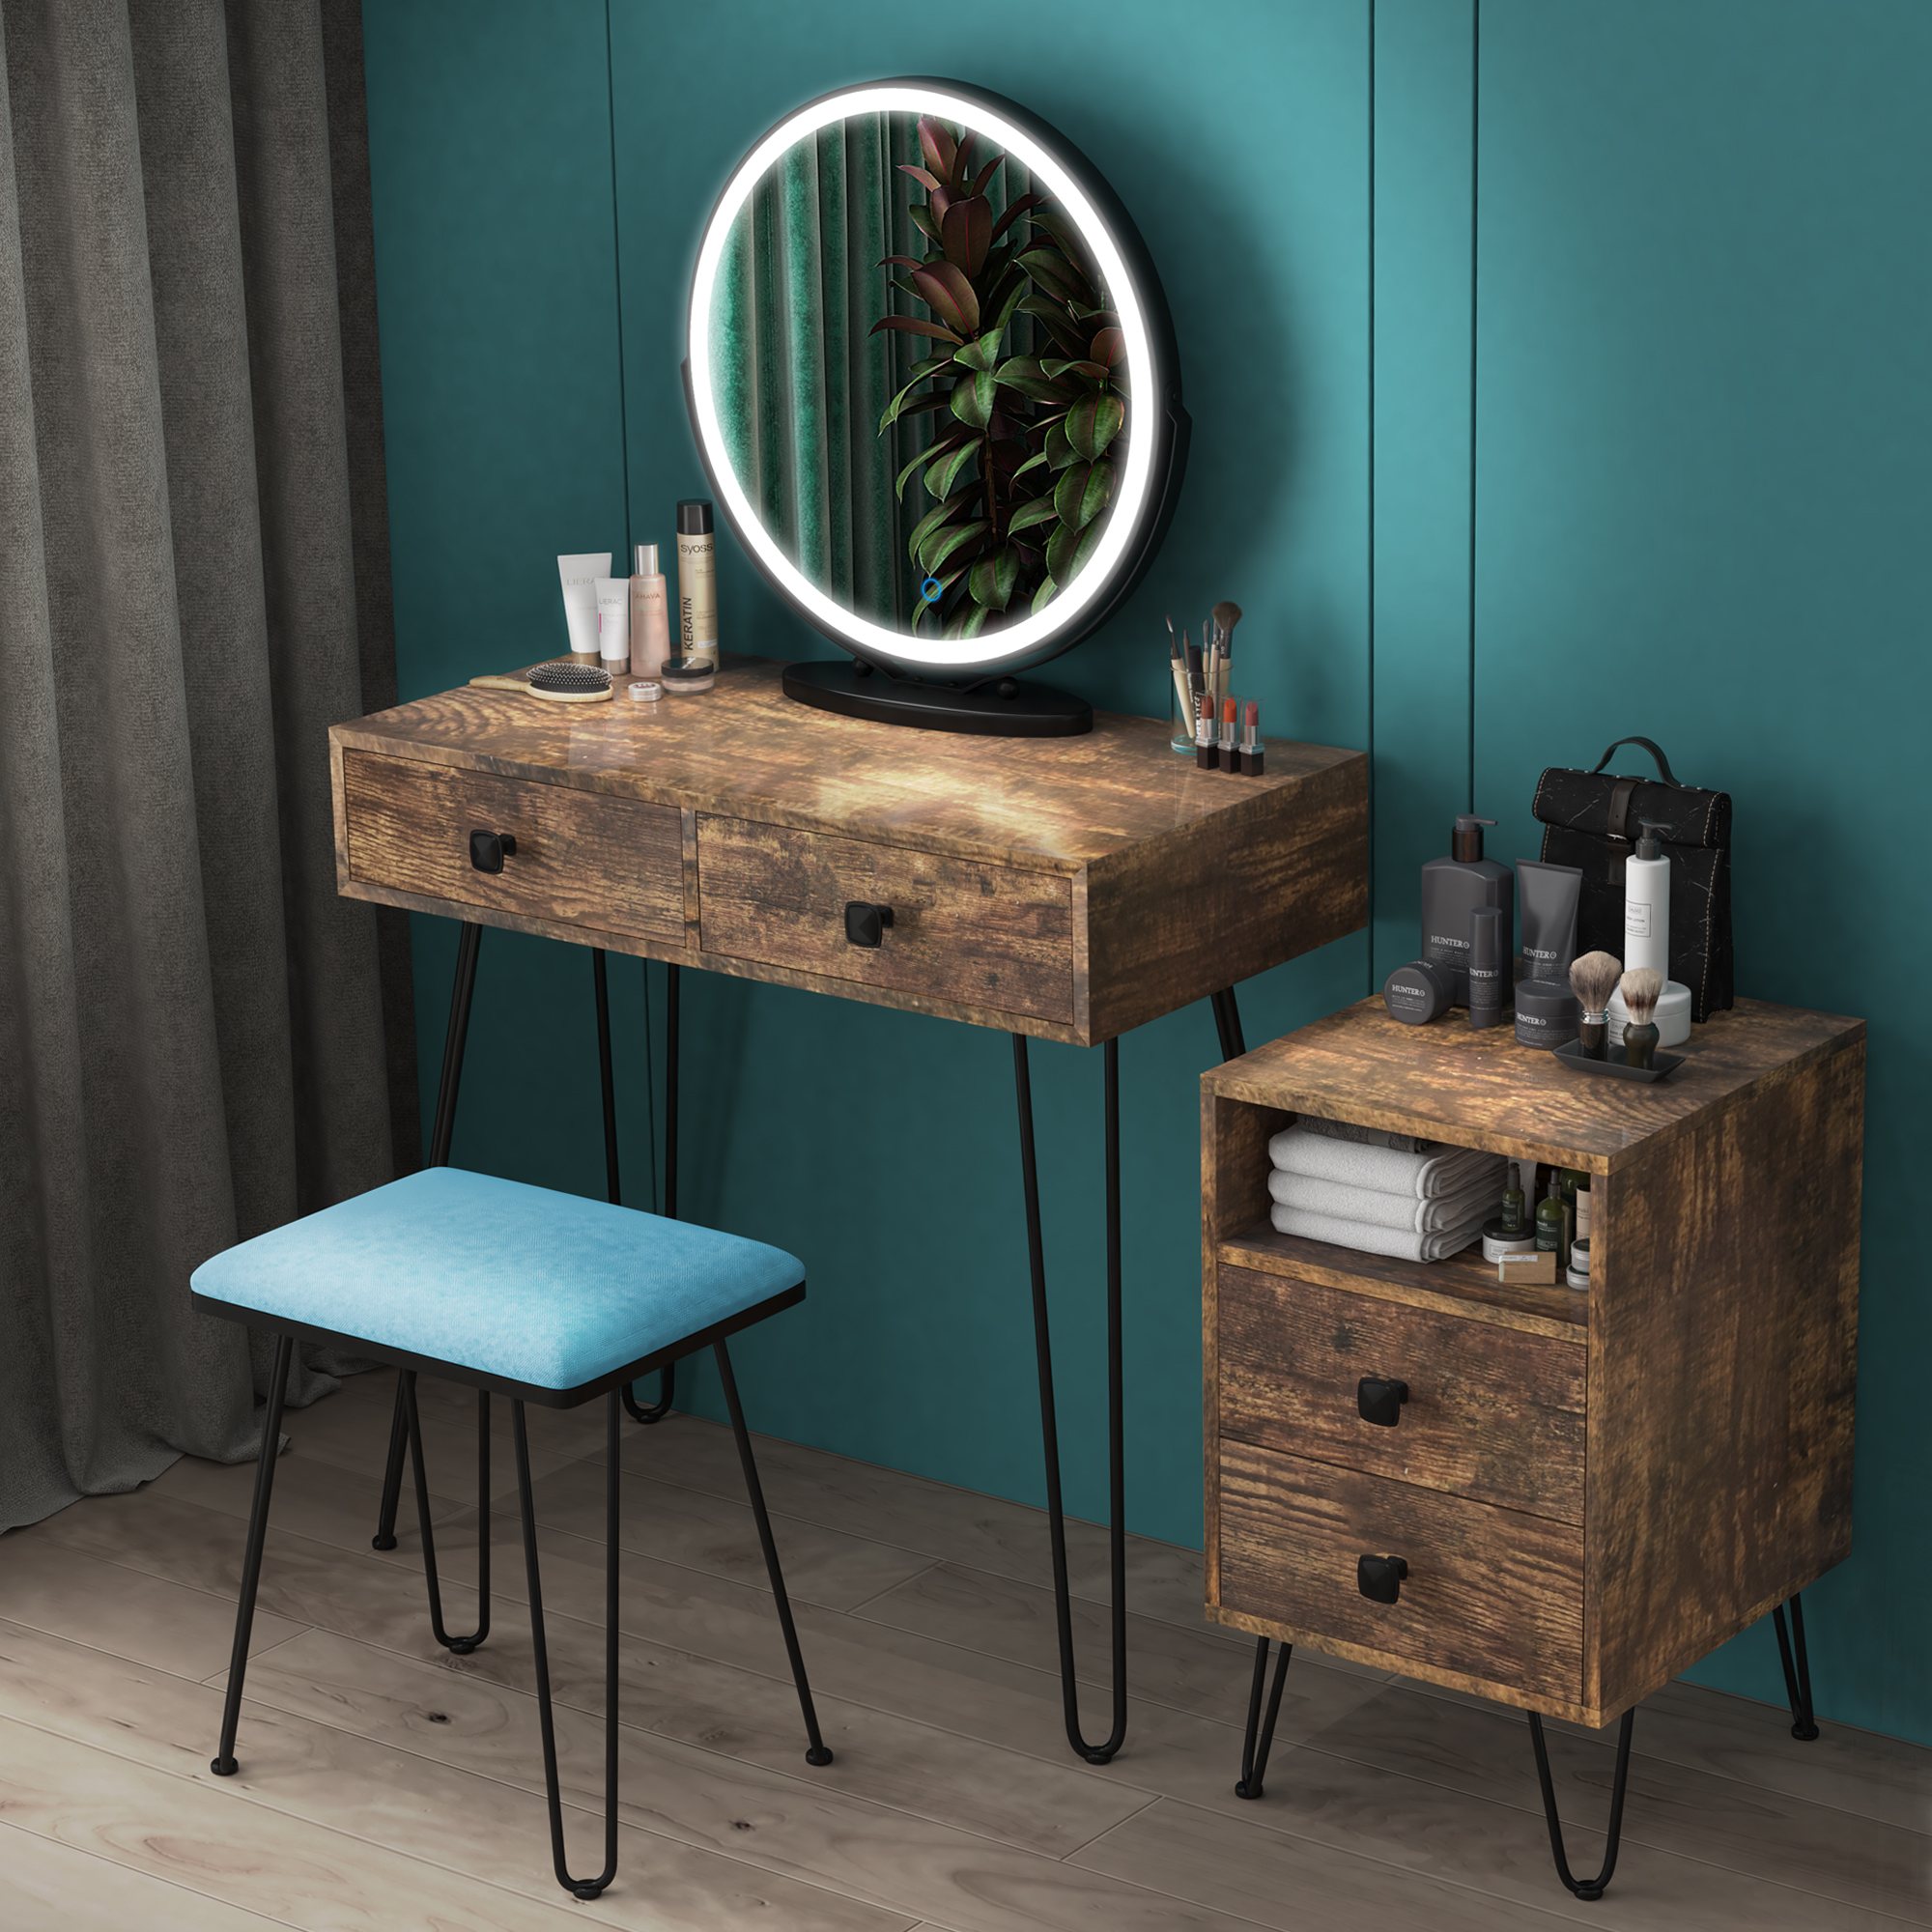  Makeup vanity Desk Set with LED Mirror, Storage Cabinet, Cushioned Stool (brown)